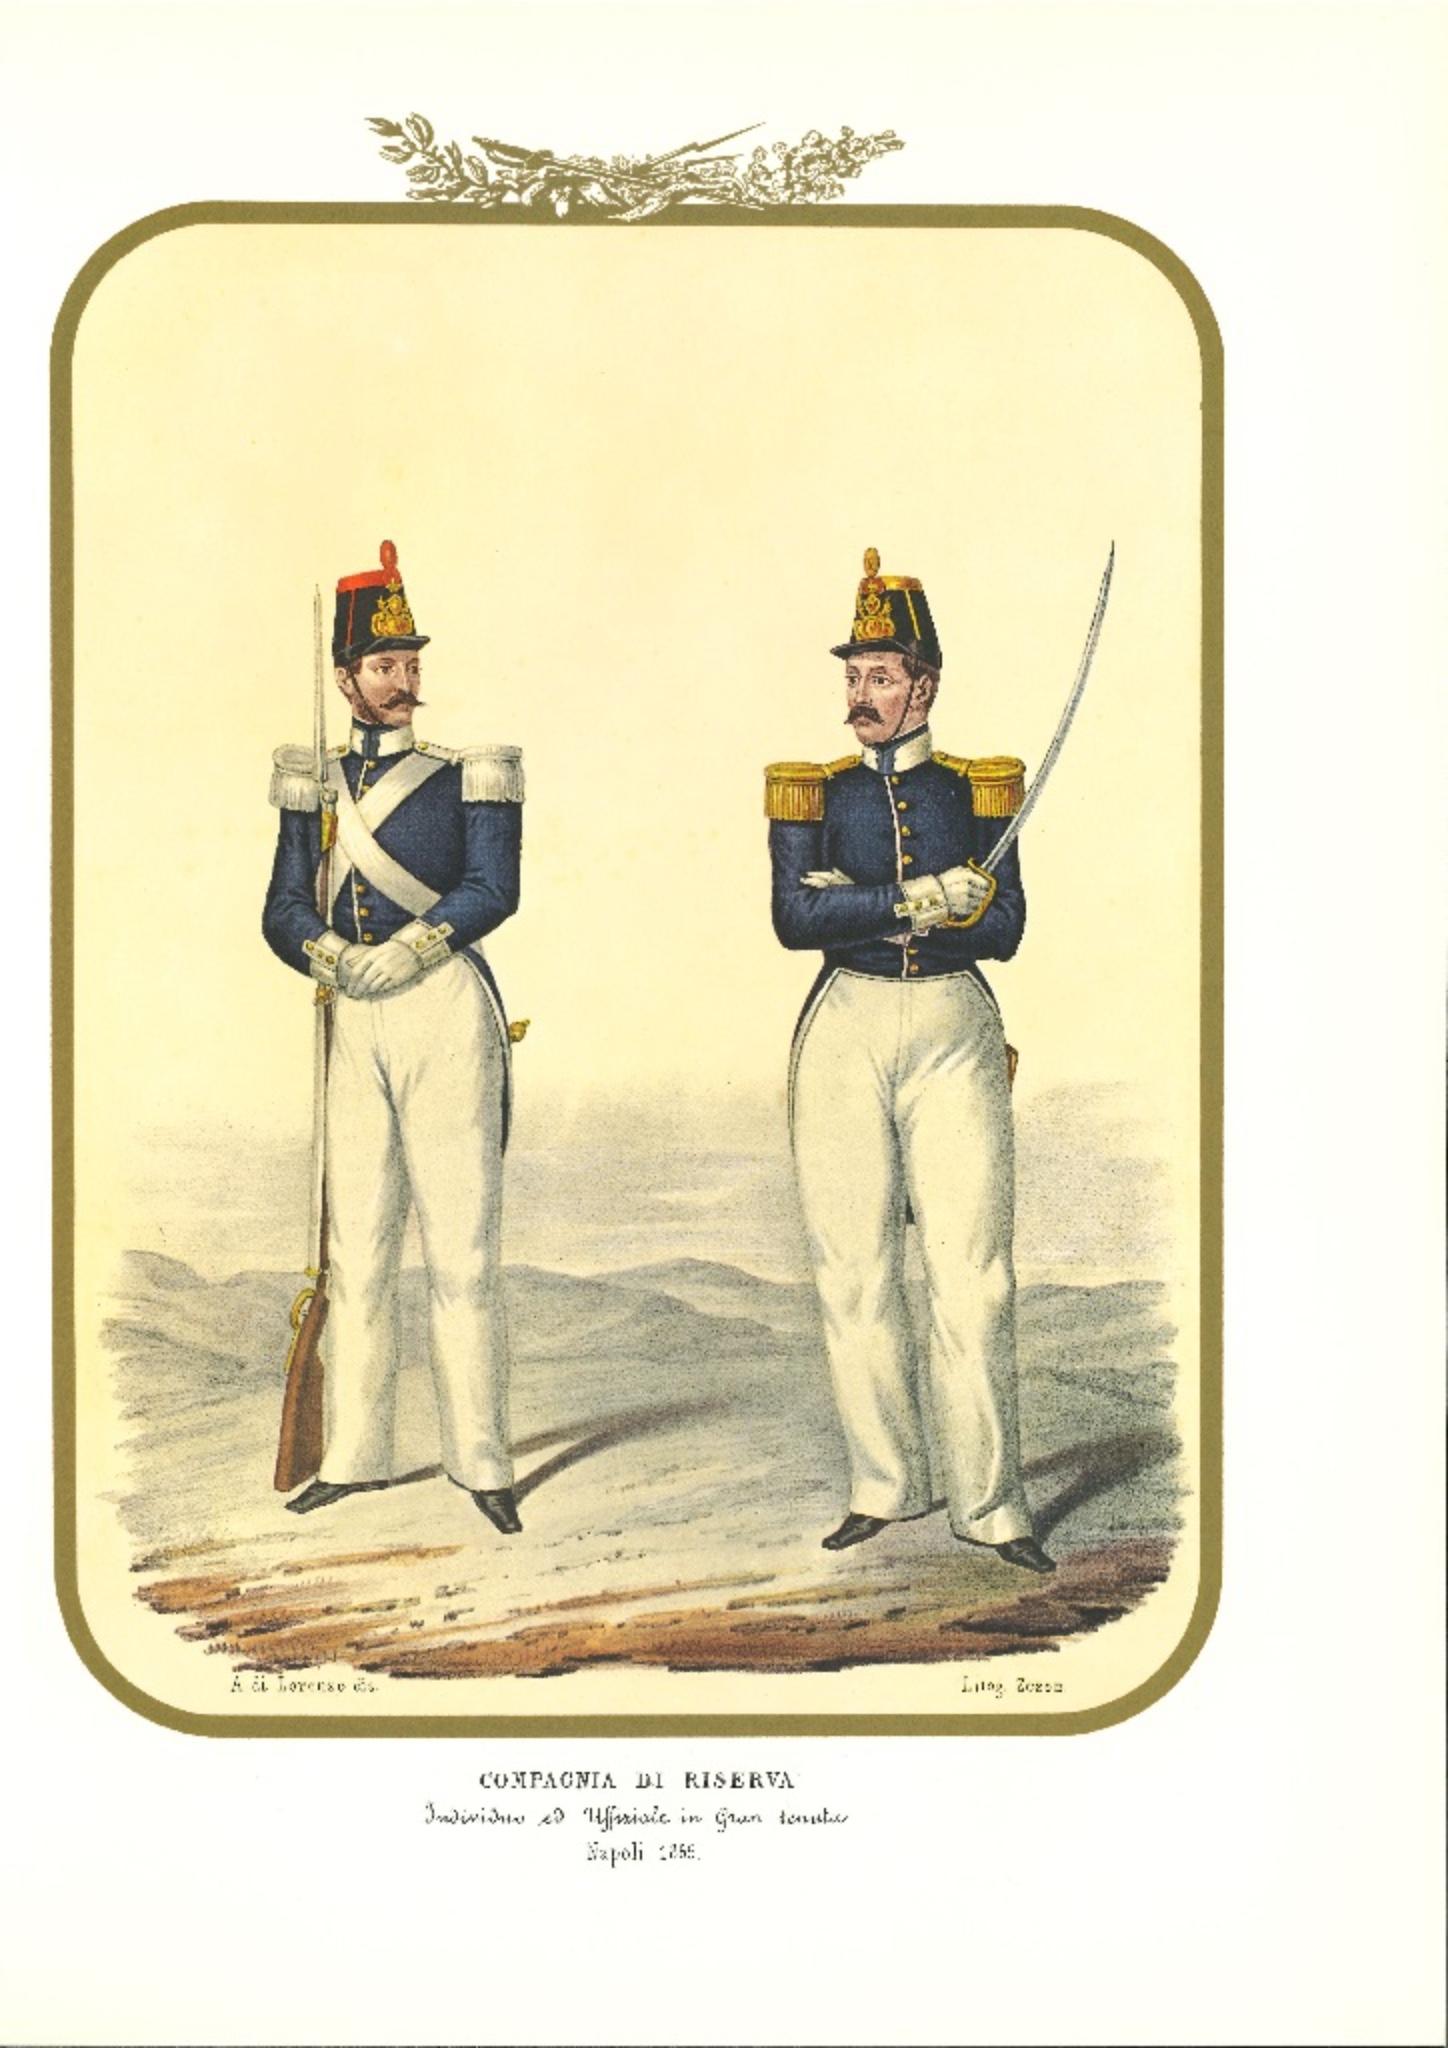 Reserve Company is a lithograph by Antonio Zezon, Naples 1855.

Interesting colored lithograph which describes some members of the Army: An Individual and  Officer in great condition.

In excellent condition, this print belongs to one of the most